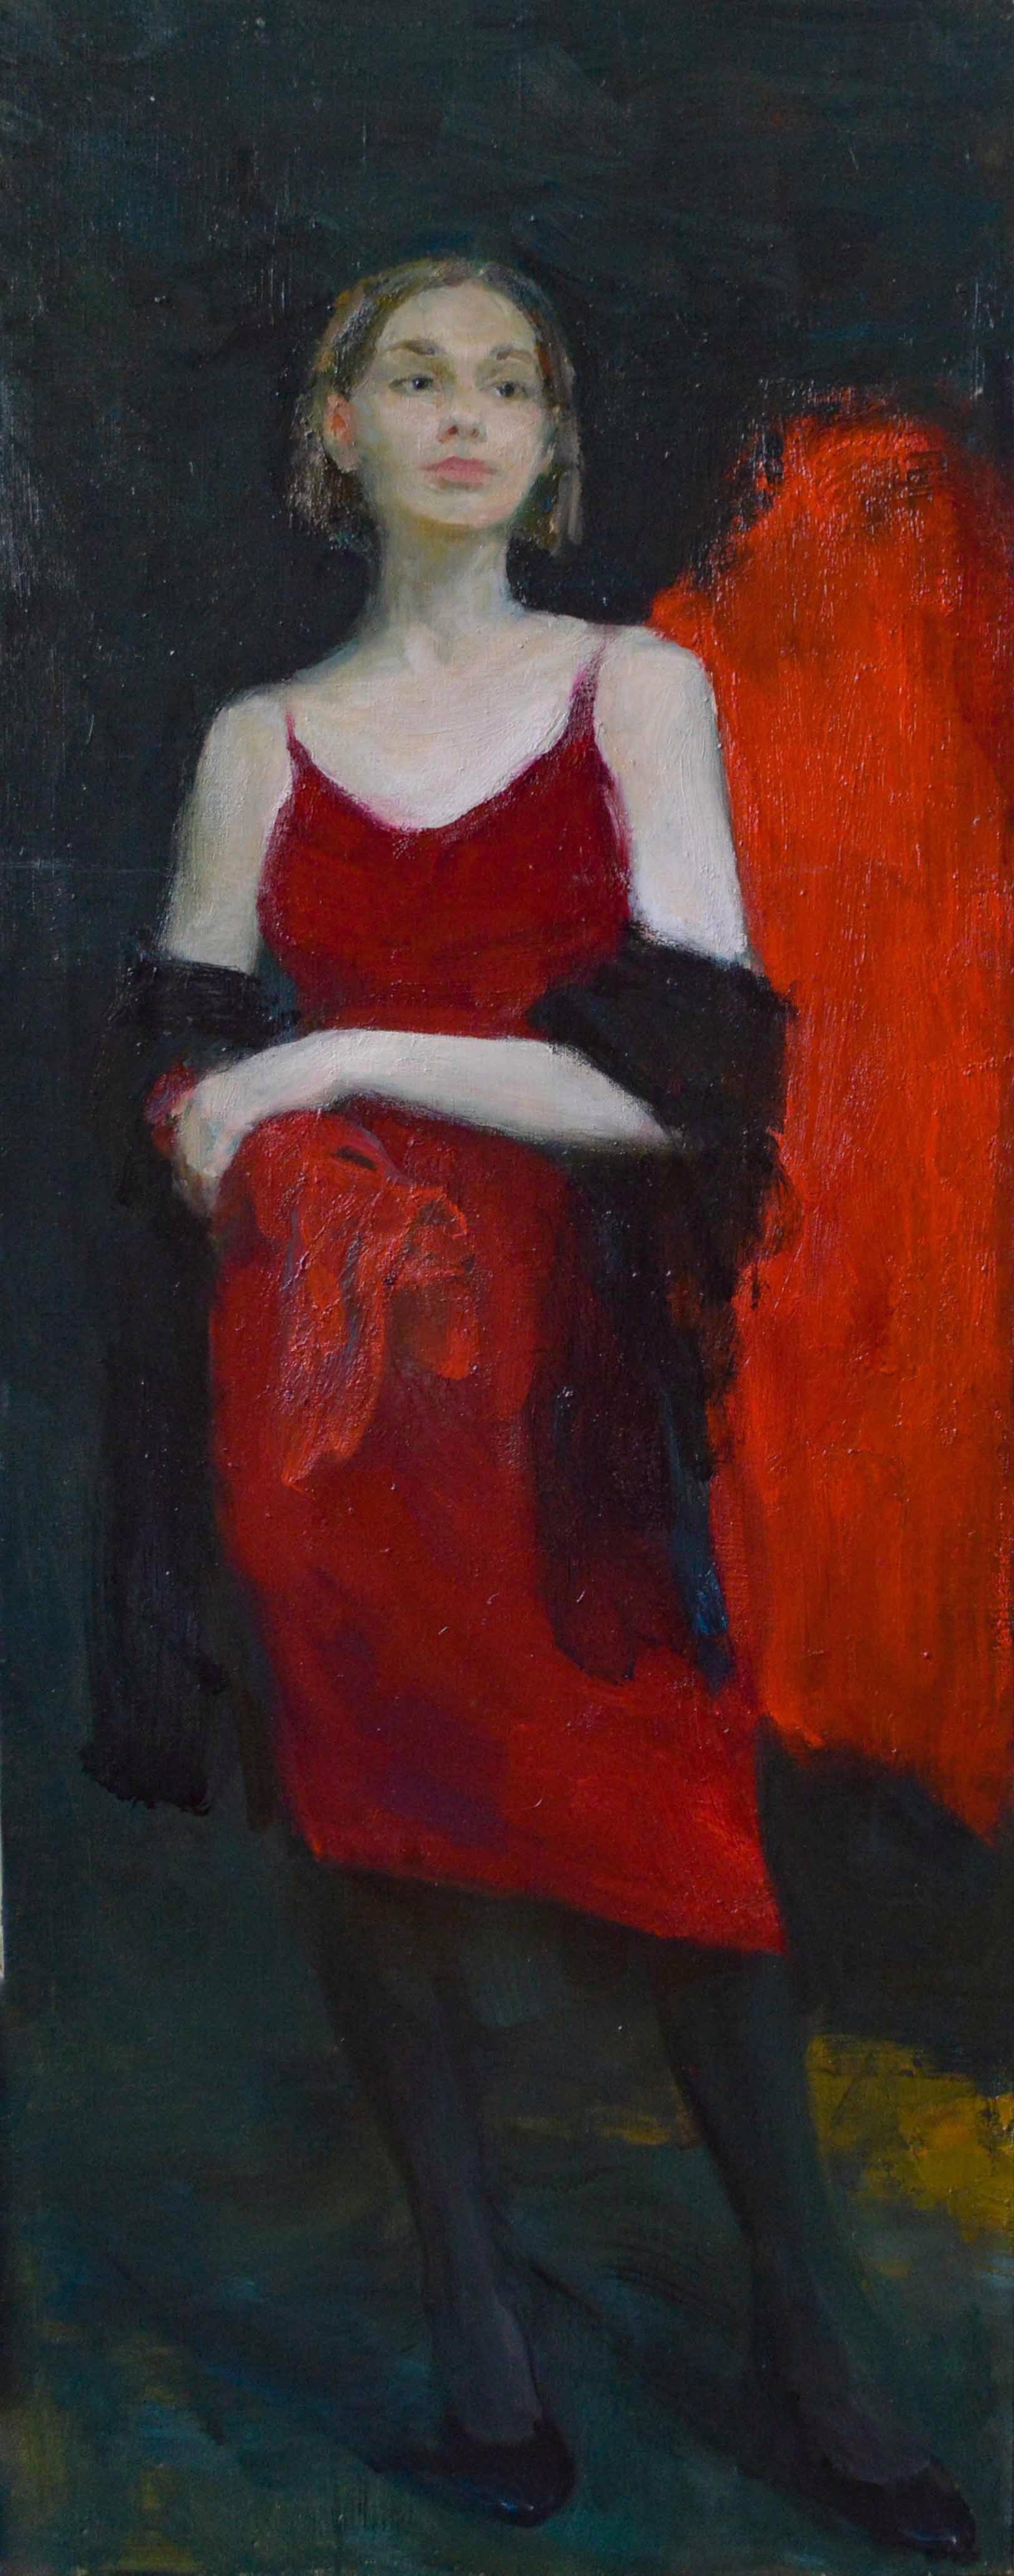 Lady in Red by Sabina Caceres